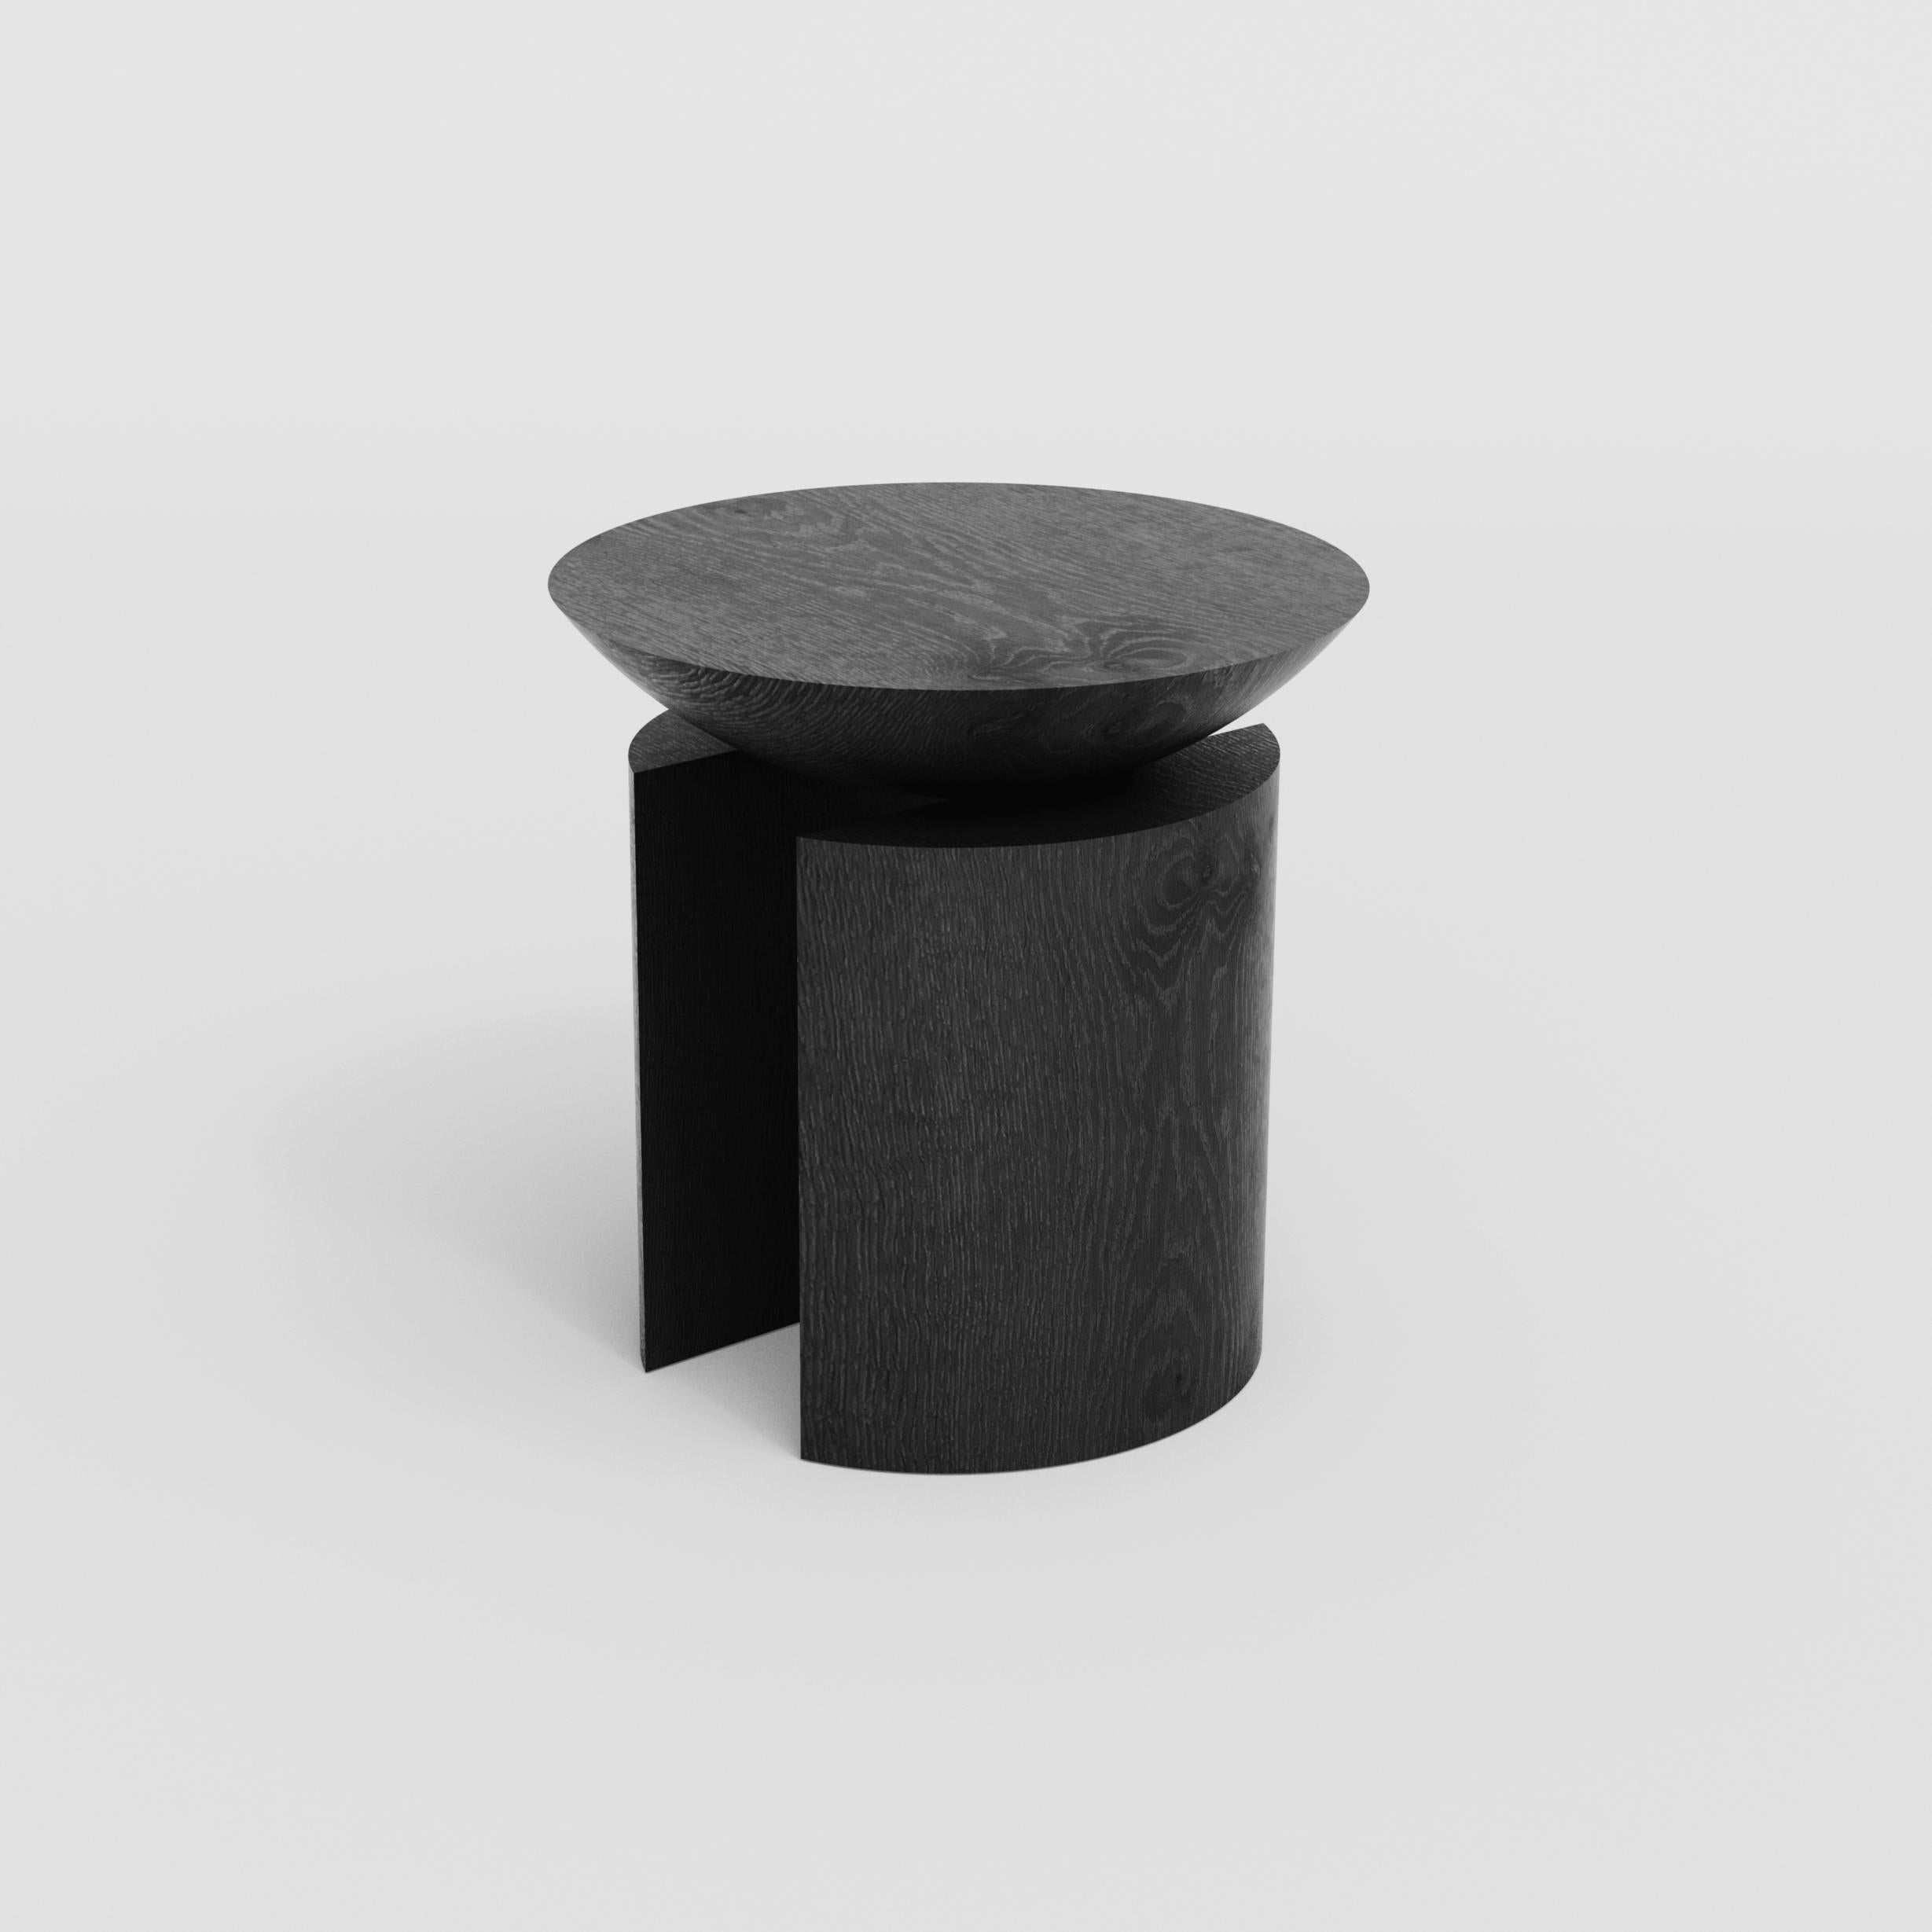 Brazilian Anca Larga / Sculptural Side Table/Stool / Hardwood by Pedro Paulo Venzon For Sale